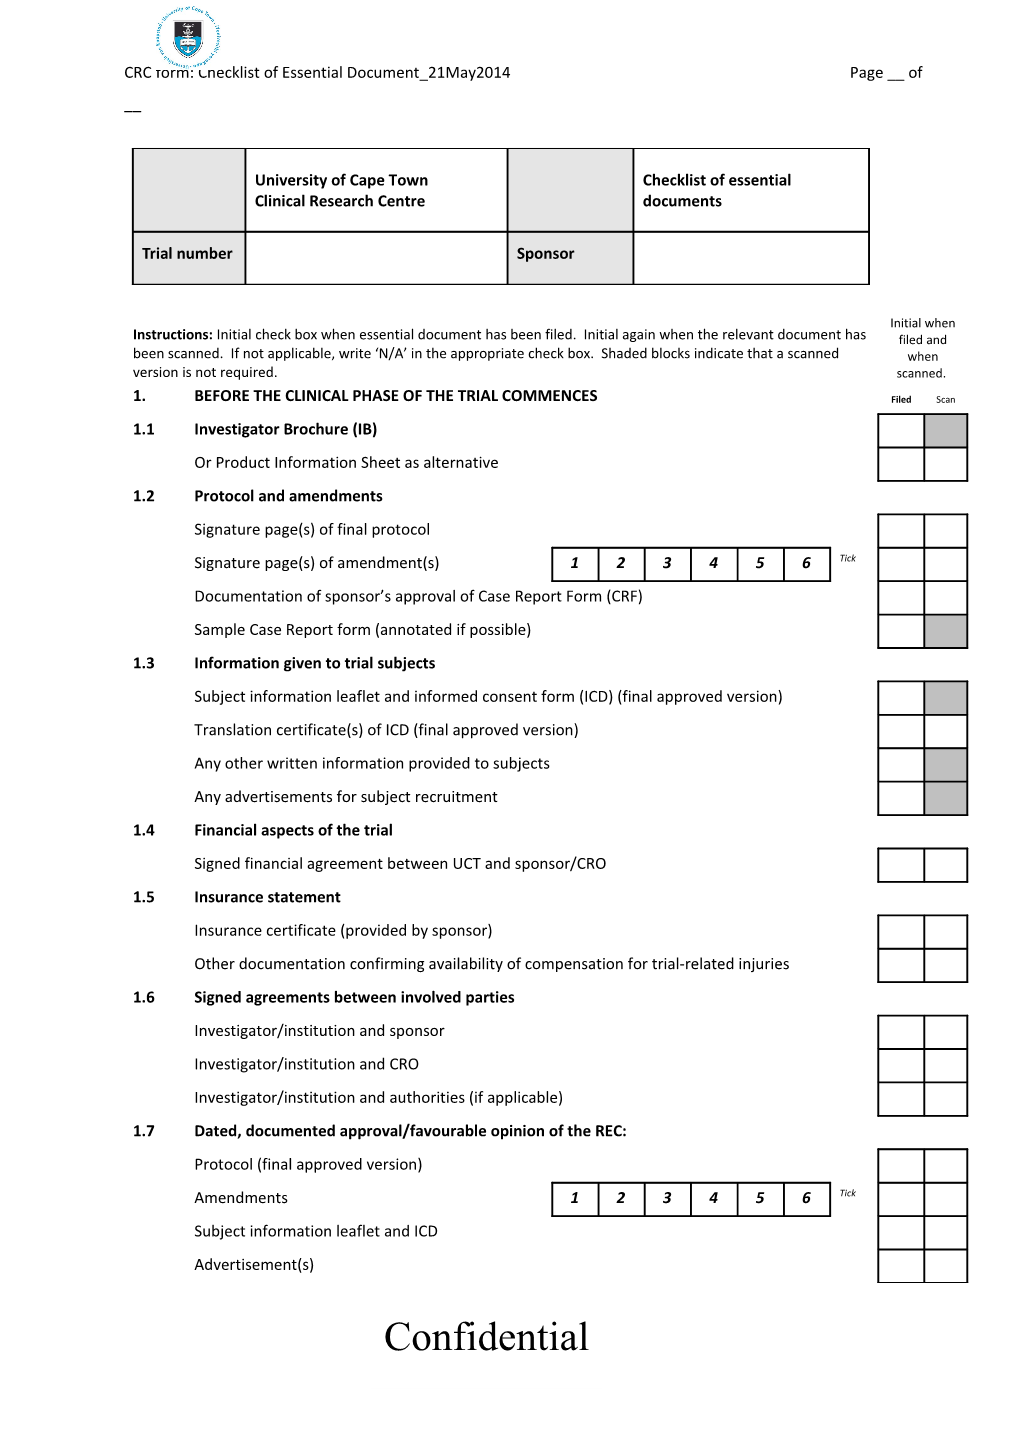 CRC Form:Checklist of Essential Document 21May2014page __ of __